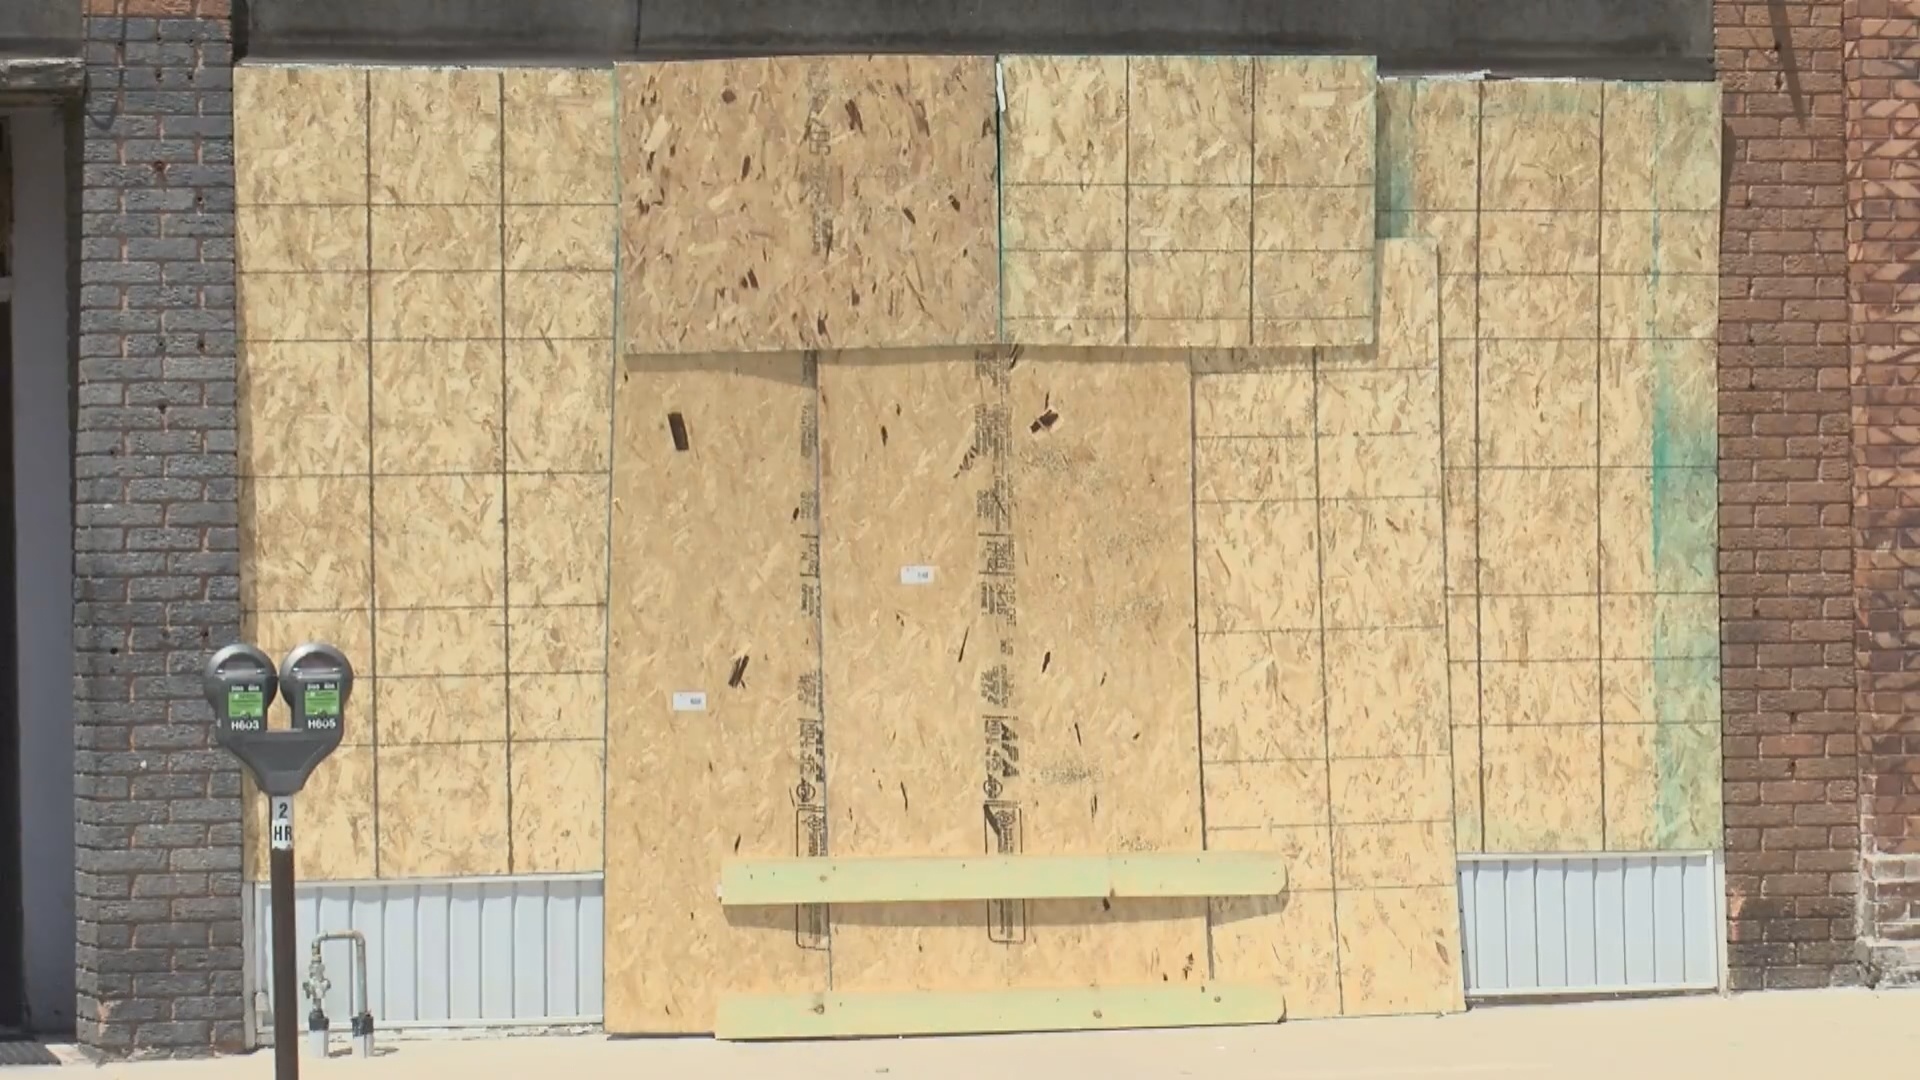 Sioux City businesses board up property with plywood